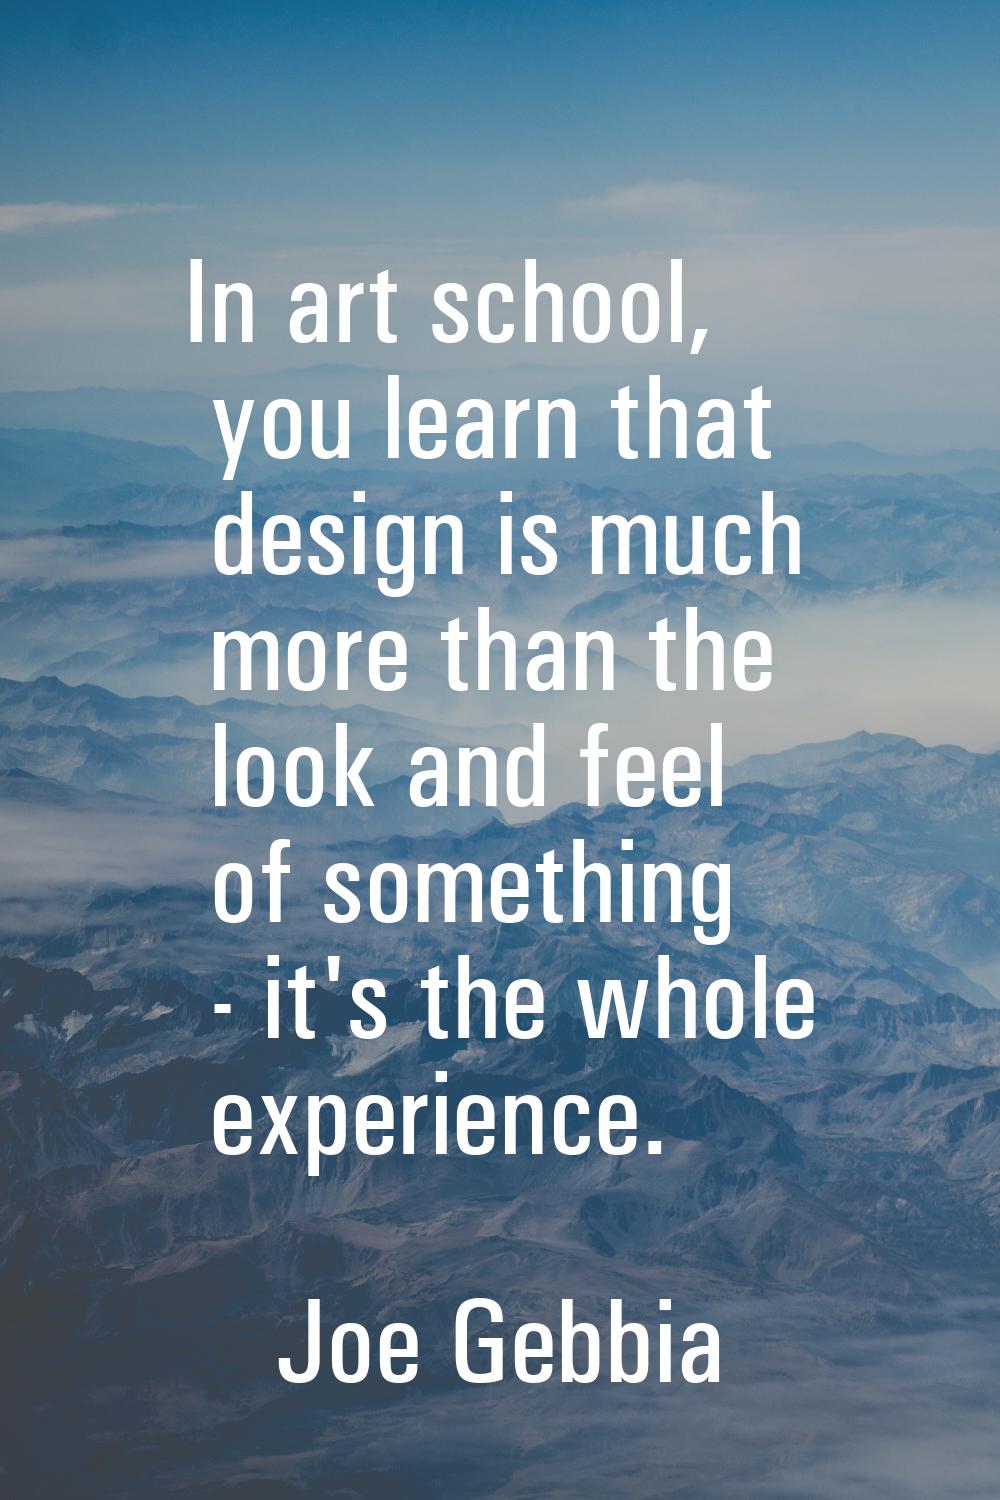 In art school, you learn that design is much more than the look and feel of something - it's the wh